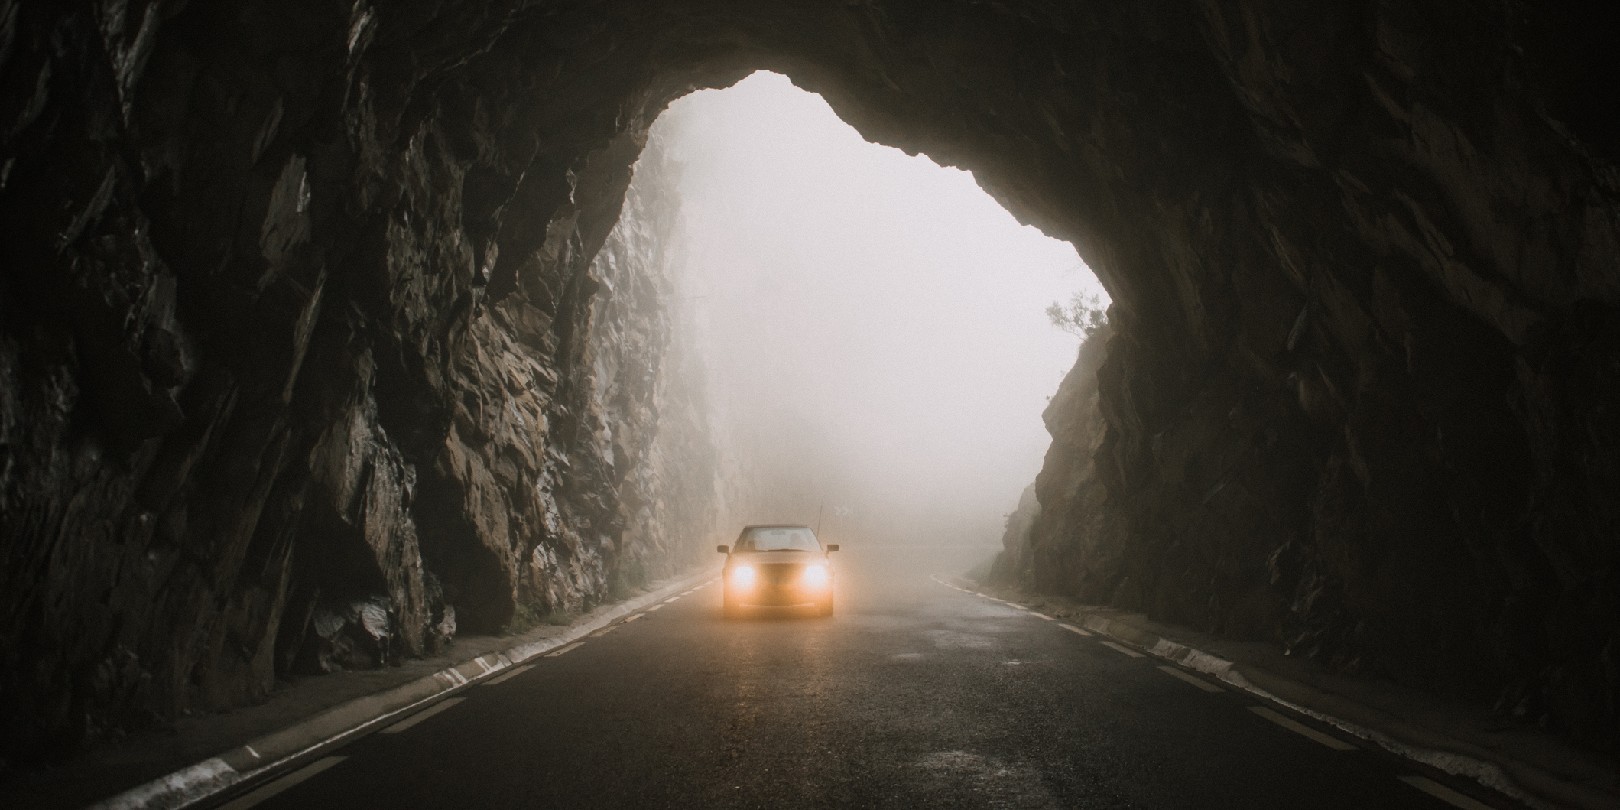 A car with lights on, entering a tunnel road